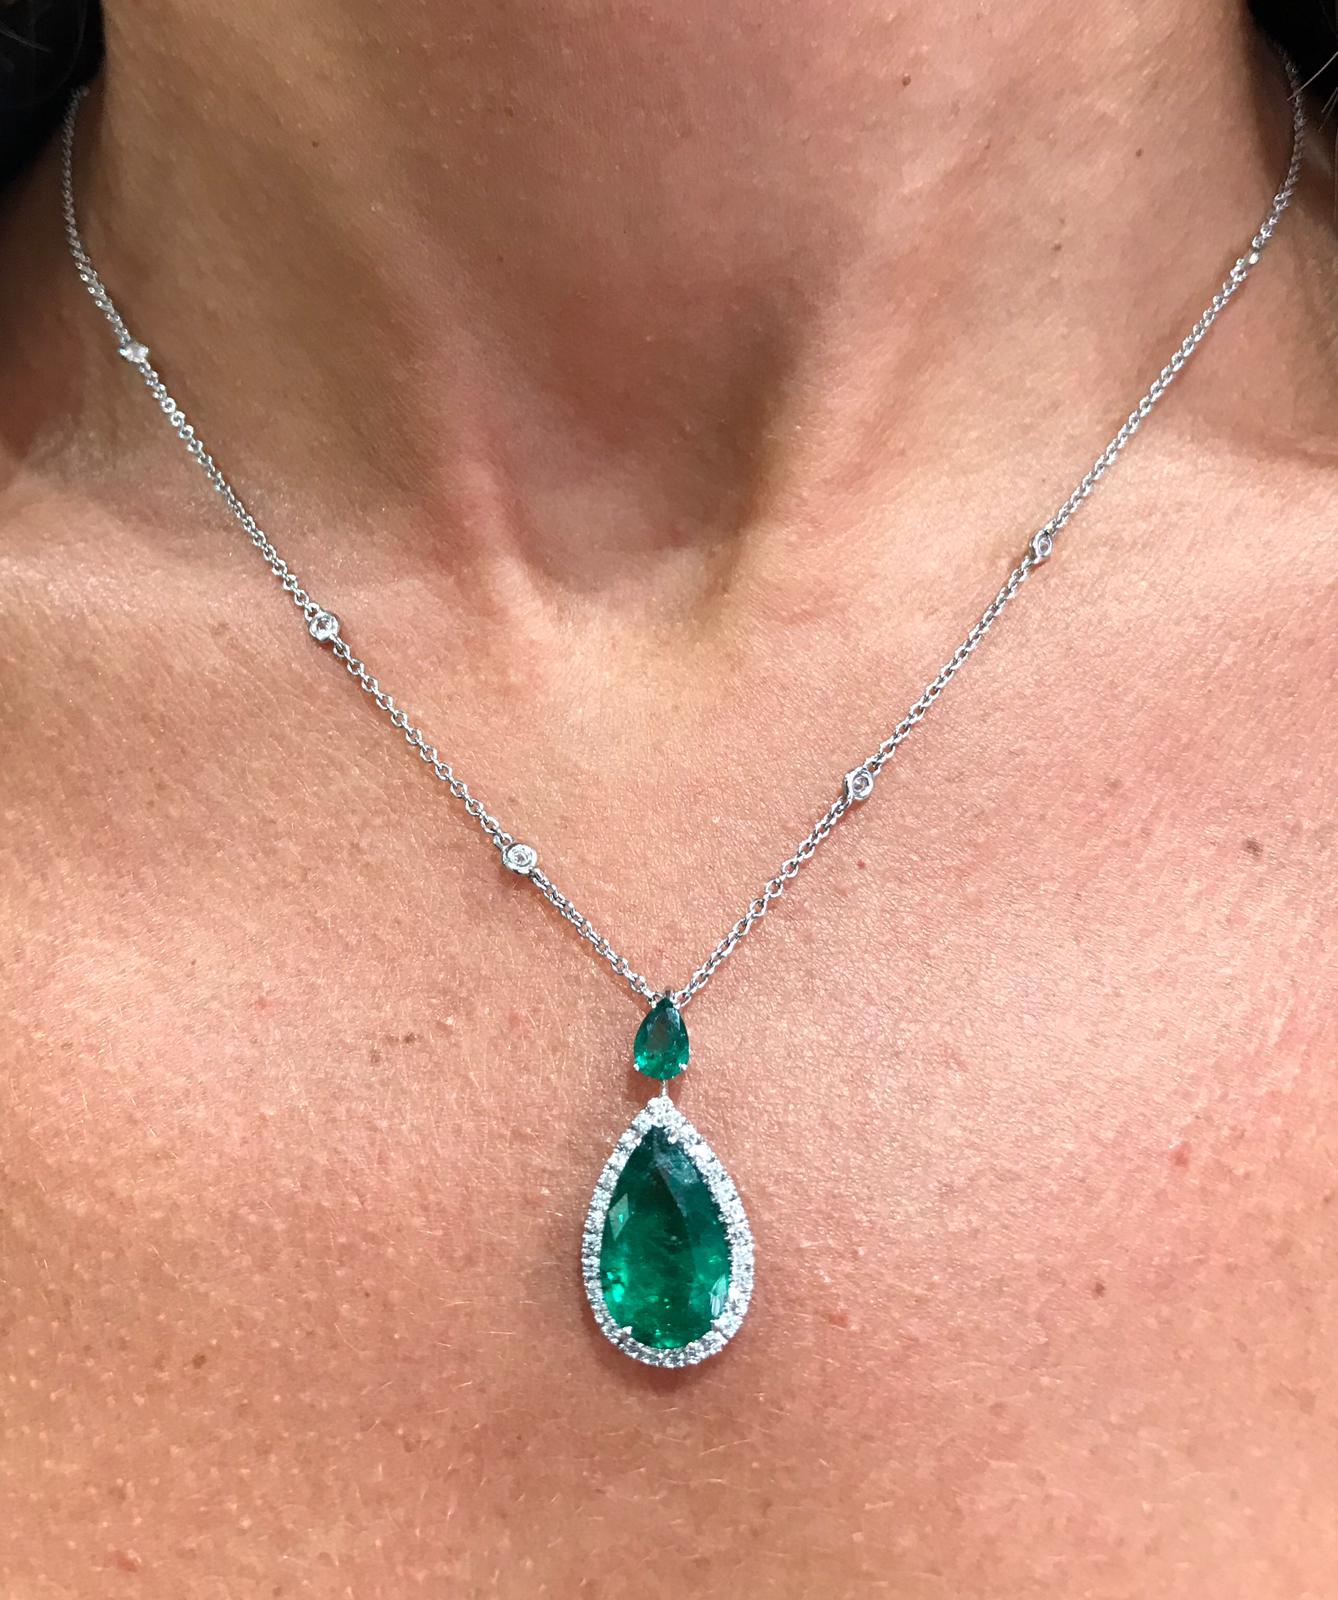 Women's Pendant with a Certified Drop Emerald, Diamonds and Pear Cut Emerald on Top For Sale